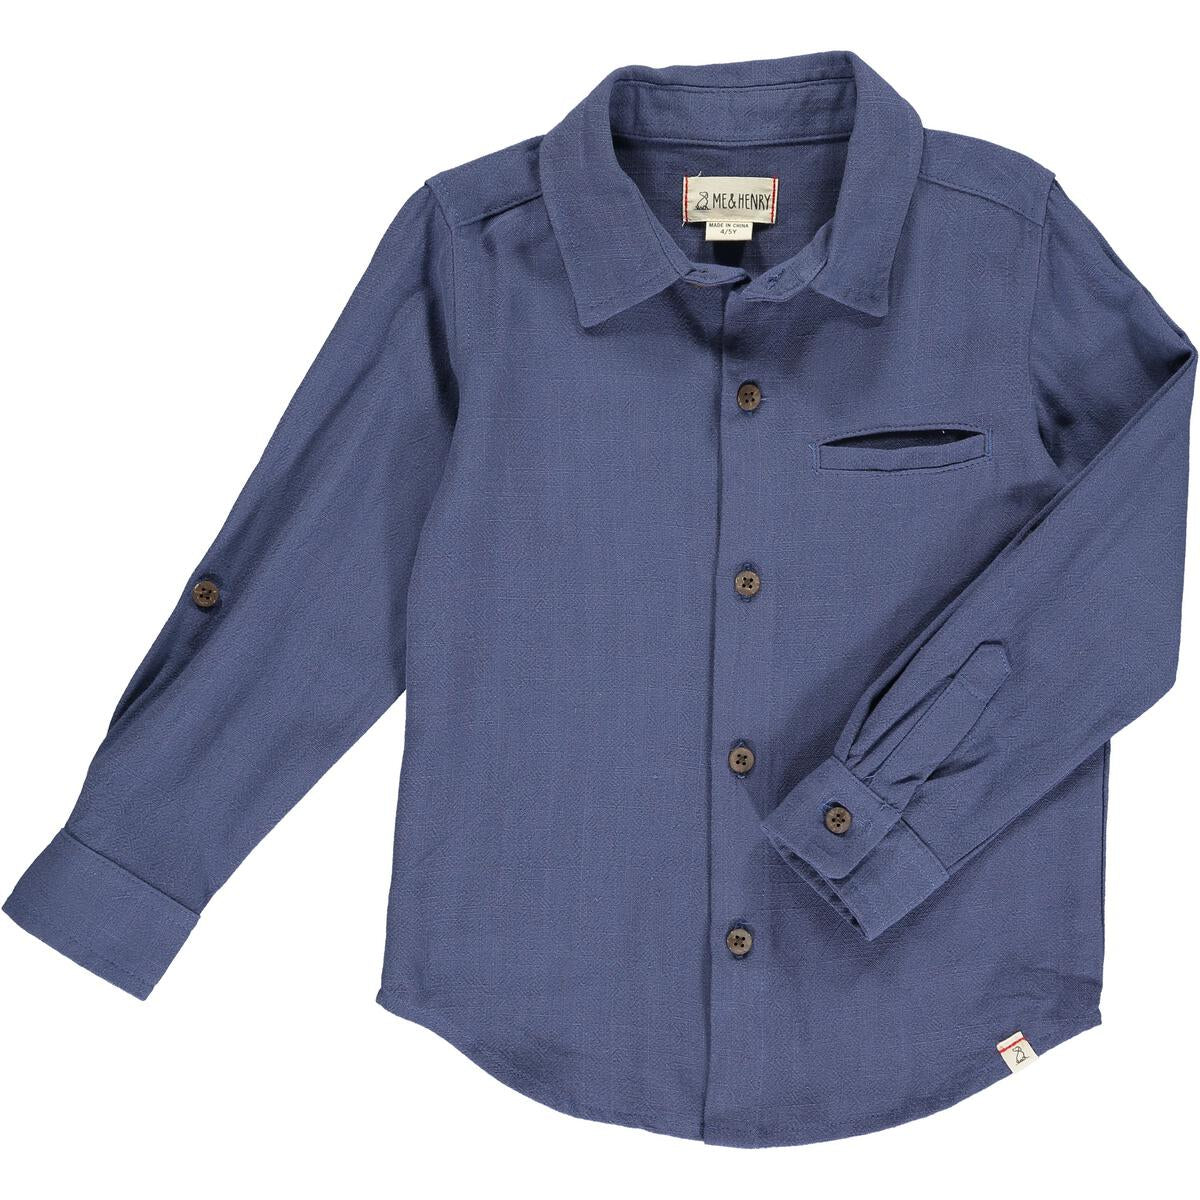 Atwood Woven shirt- Navy (FINAL SALE)